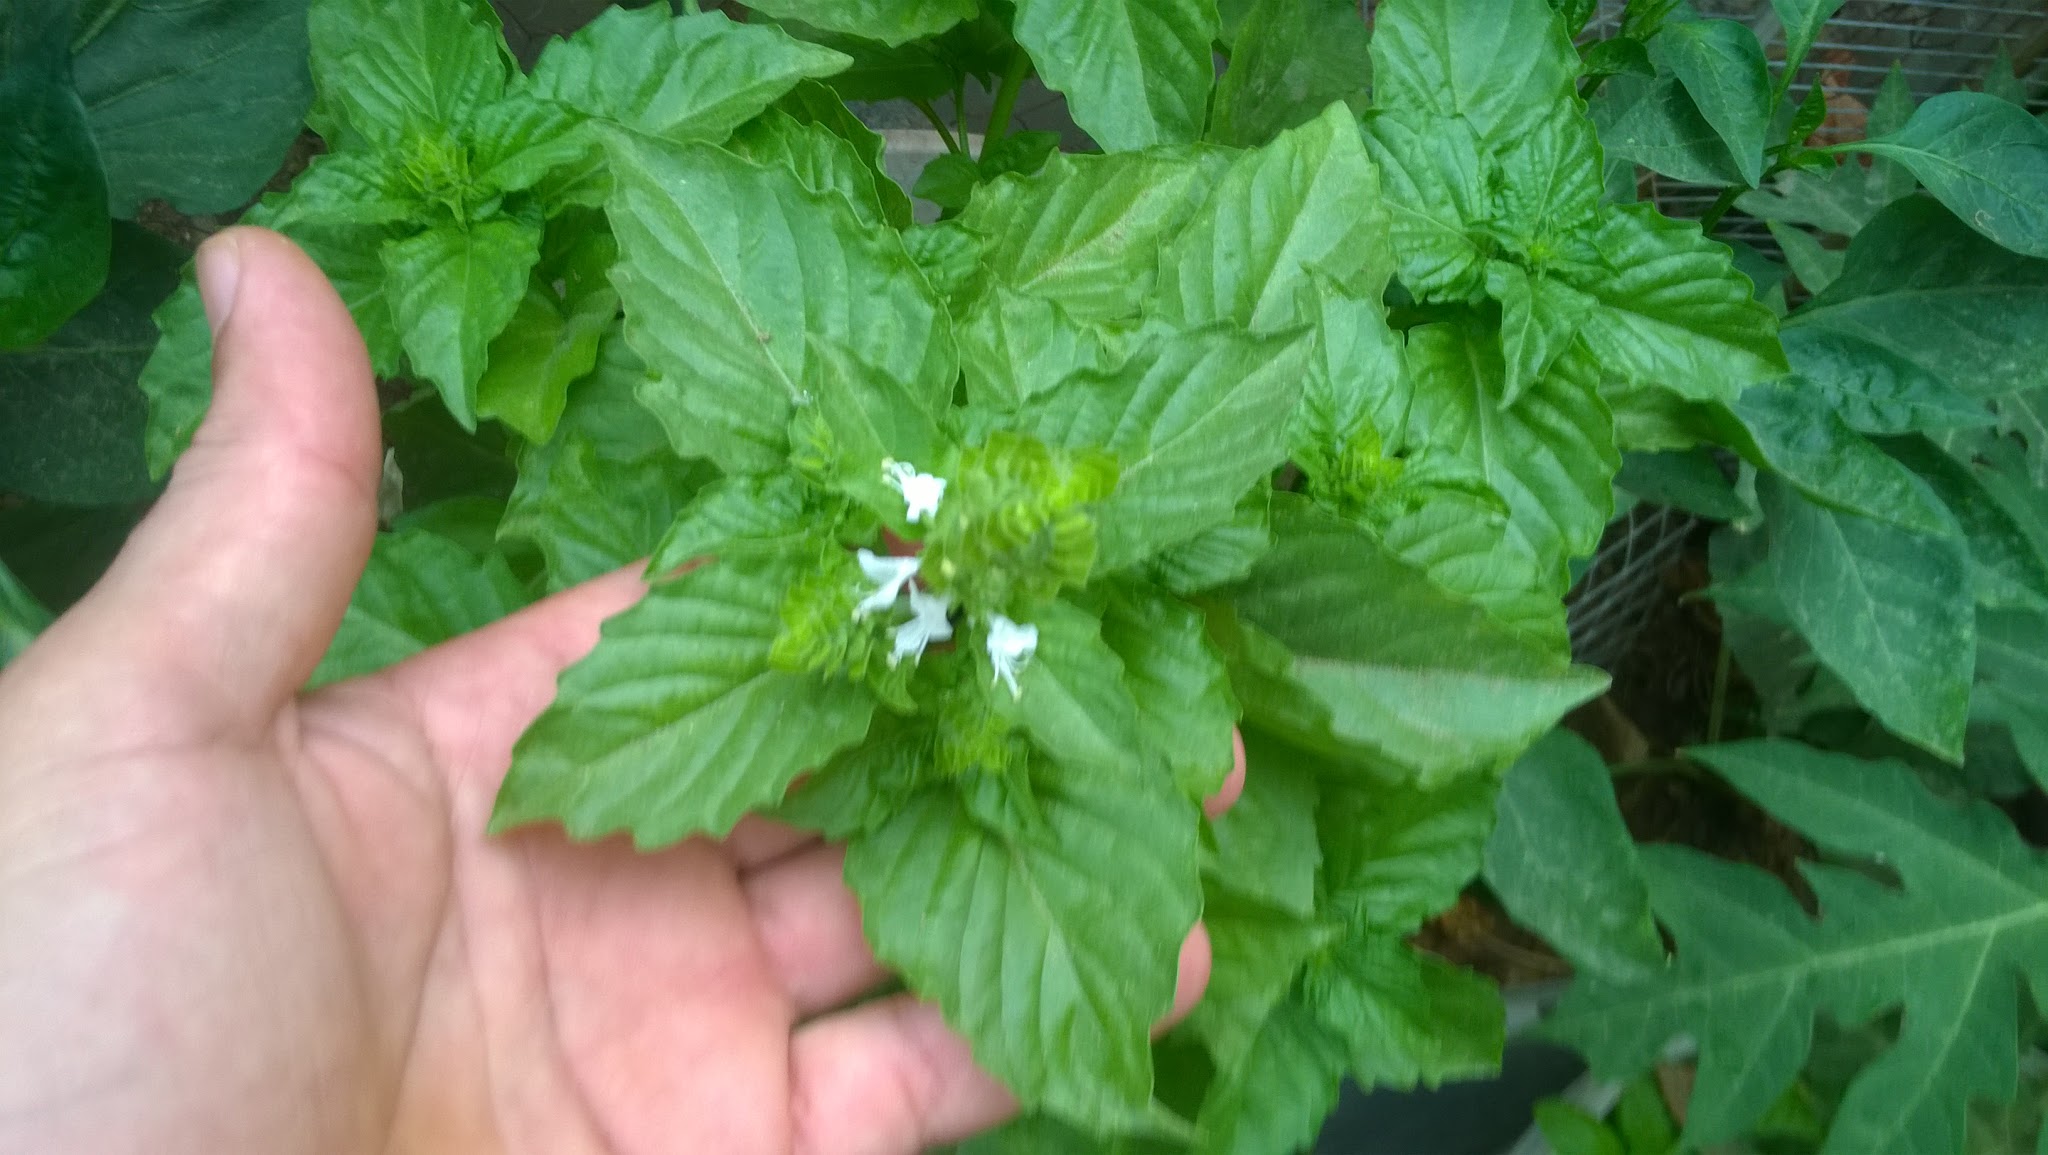 Once basil has flowered the leaves and flowers are still edible but the taste is often milder